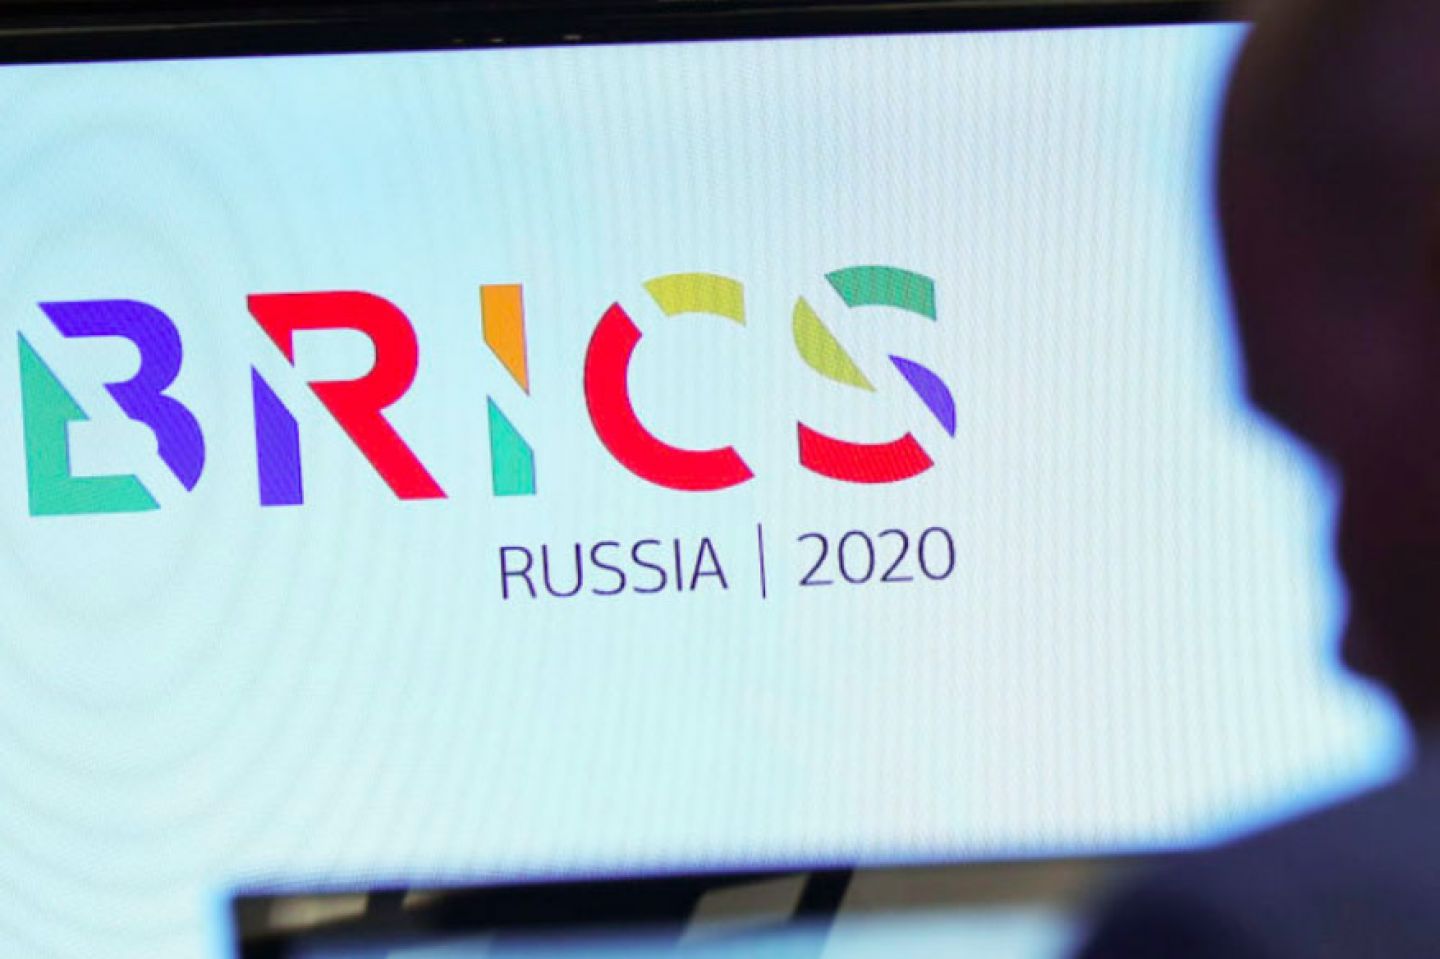 India will take over the chairmanship of BRICS from Russia and host the summit for the third time in 2021.